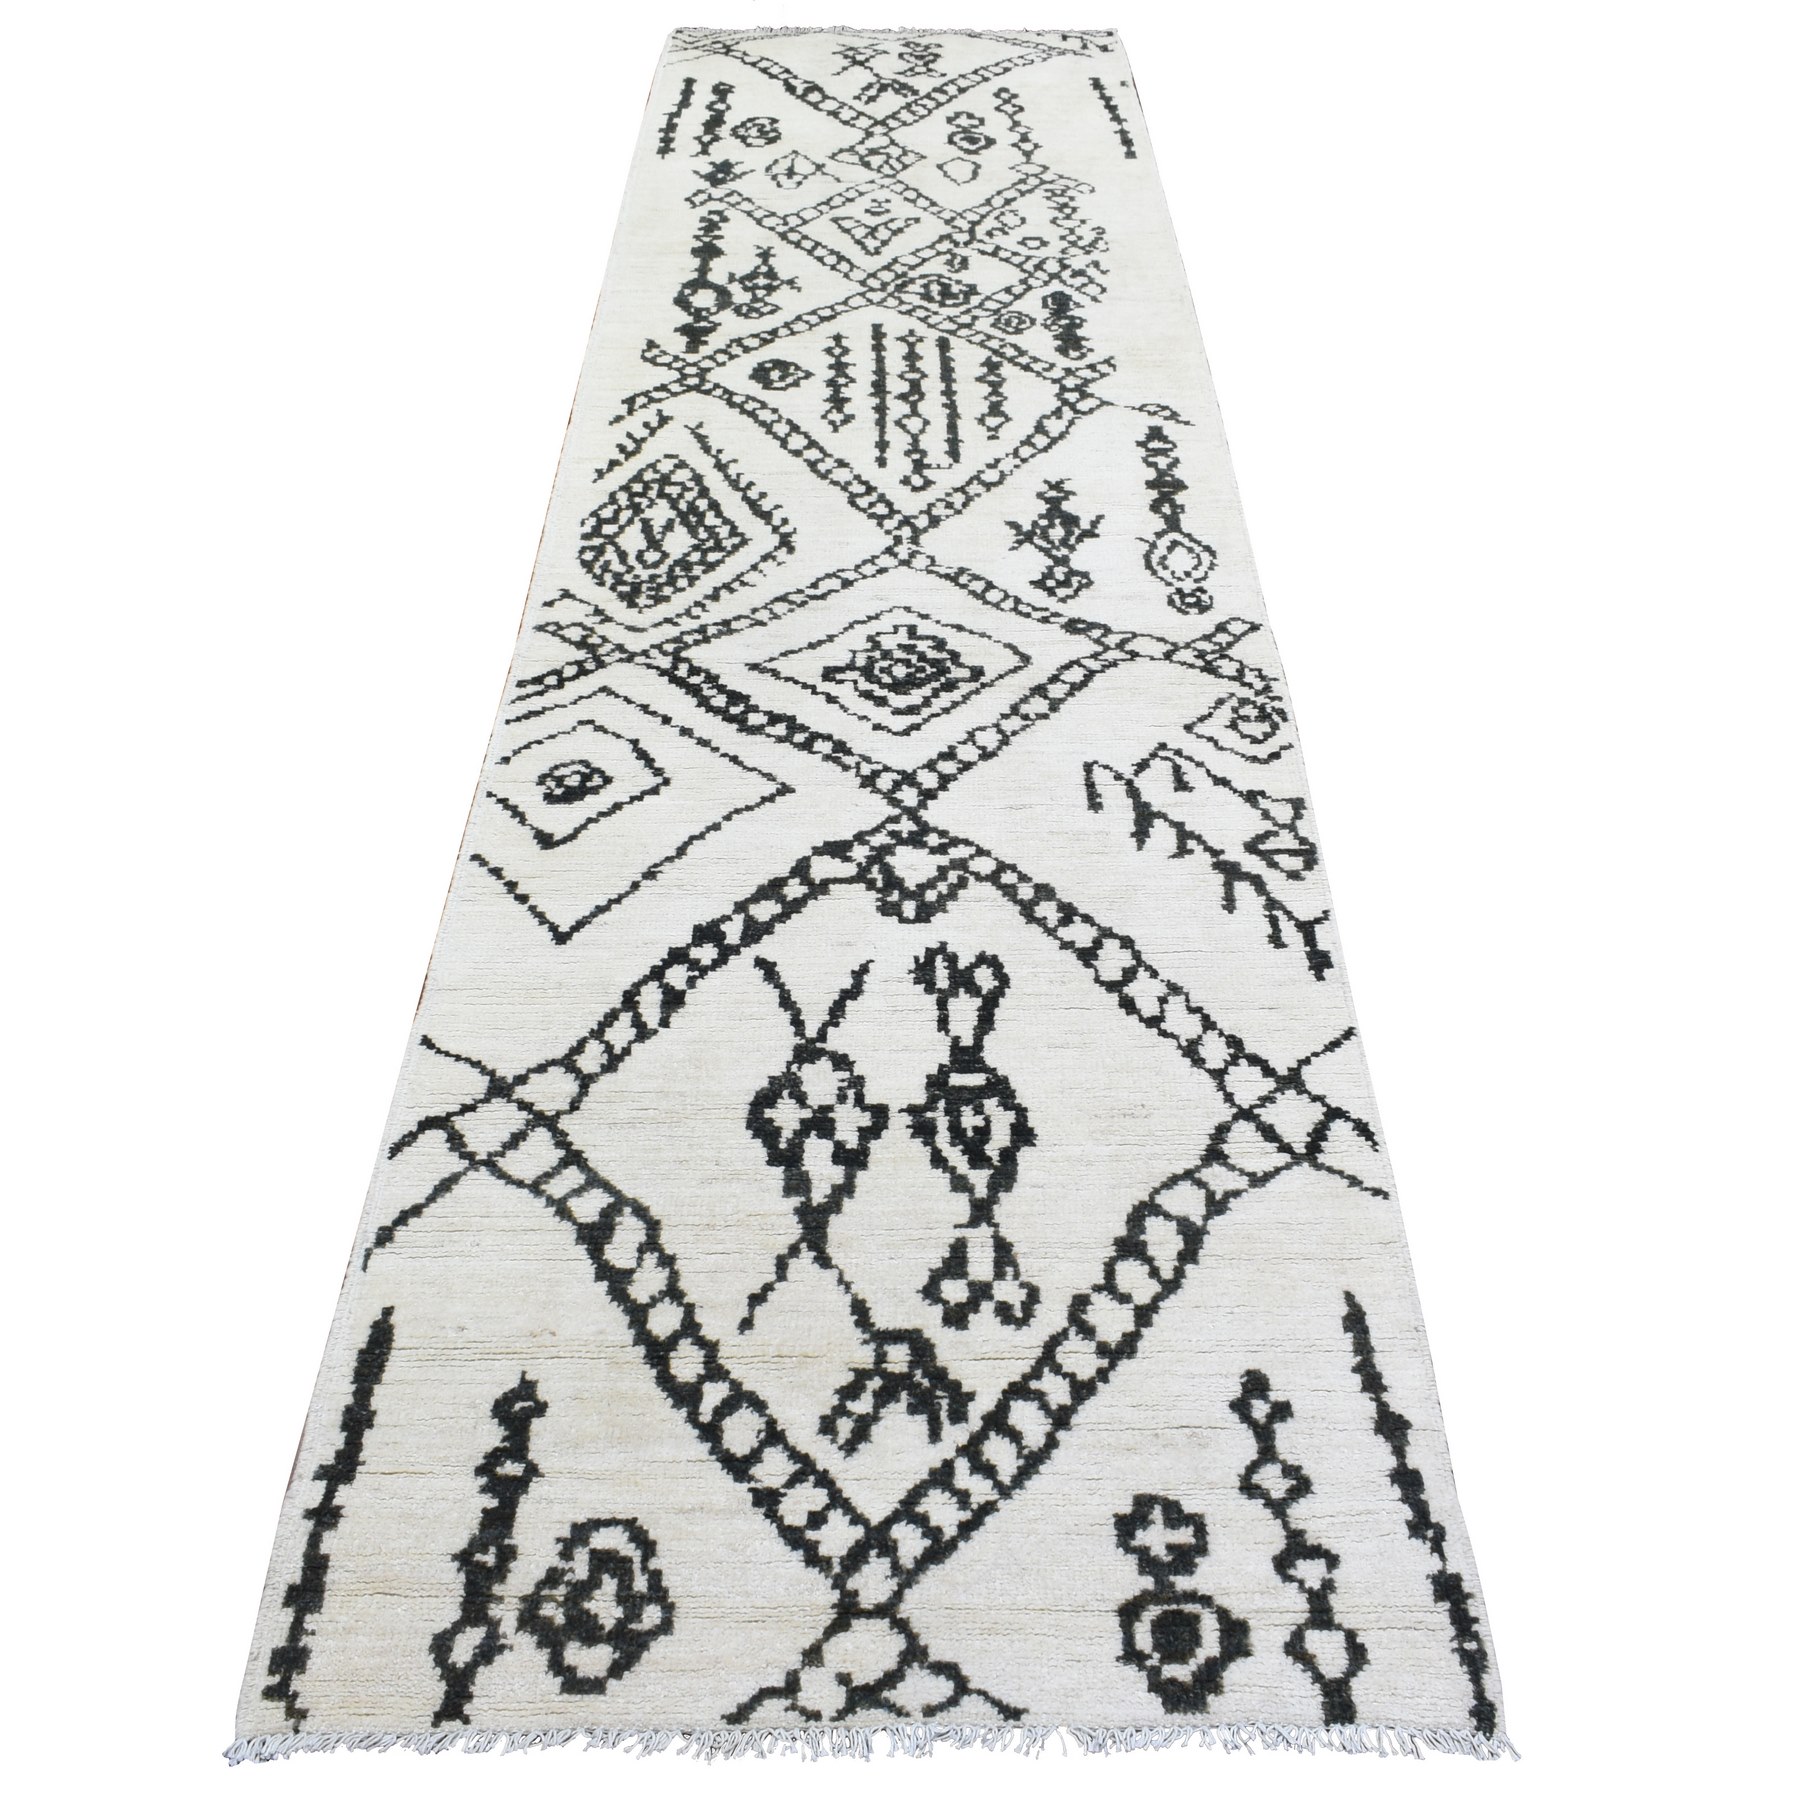 3'x11'6" Ivory, Boujaad Moroccan Berber Design with Geometric Triangular Design Natural Dyes, Soft and Shiny Wool Hand Woven, Wide Runner Oriental Rug 